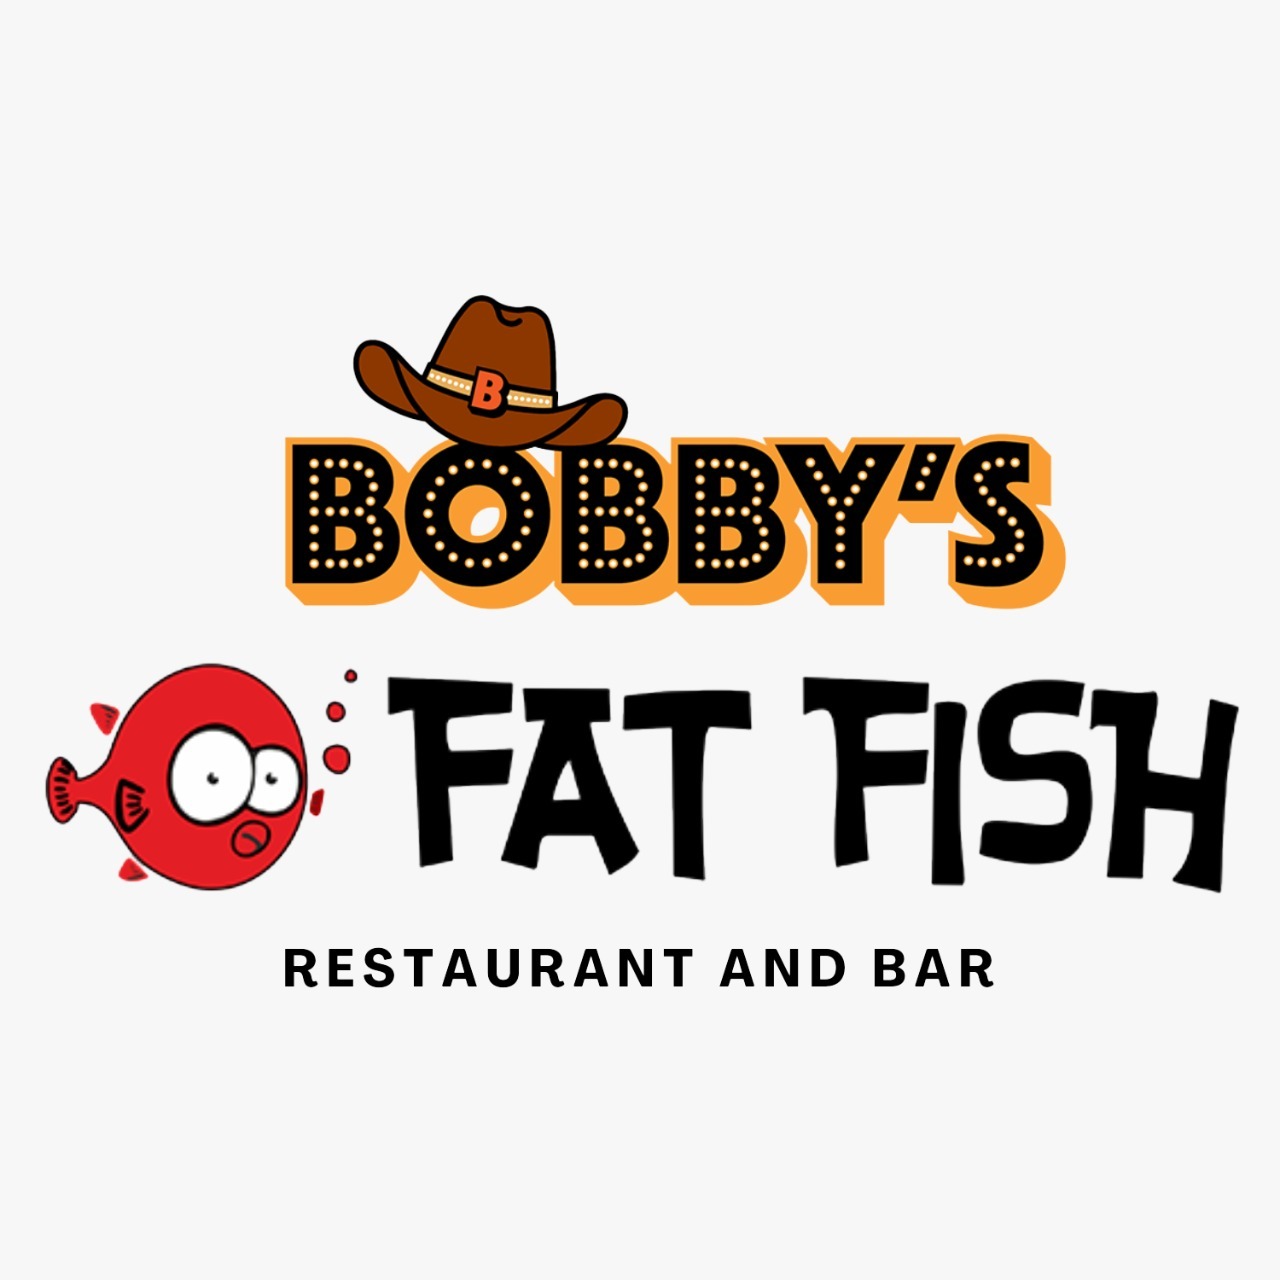 Bobby's Fat Fish|Restaurant|Food and Restaurant